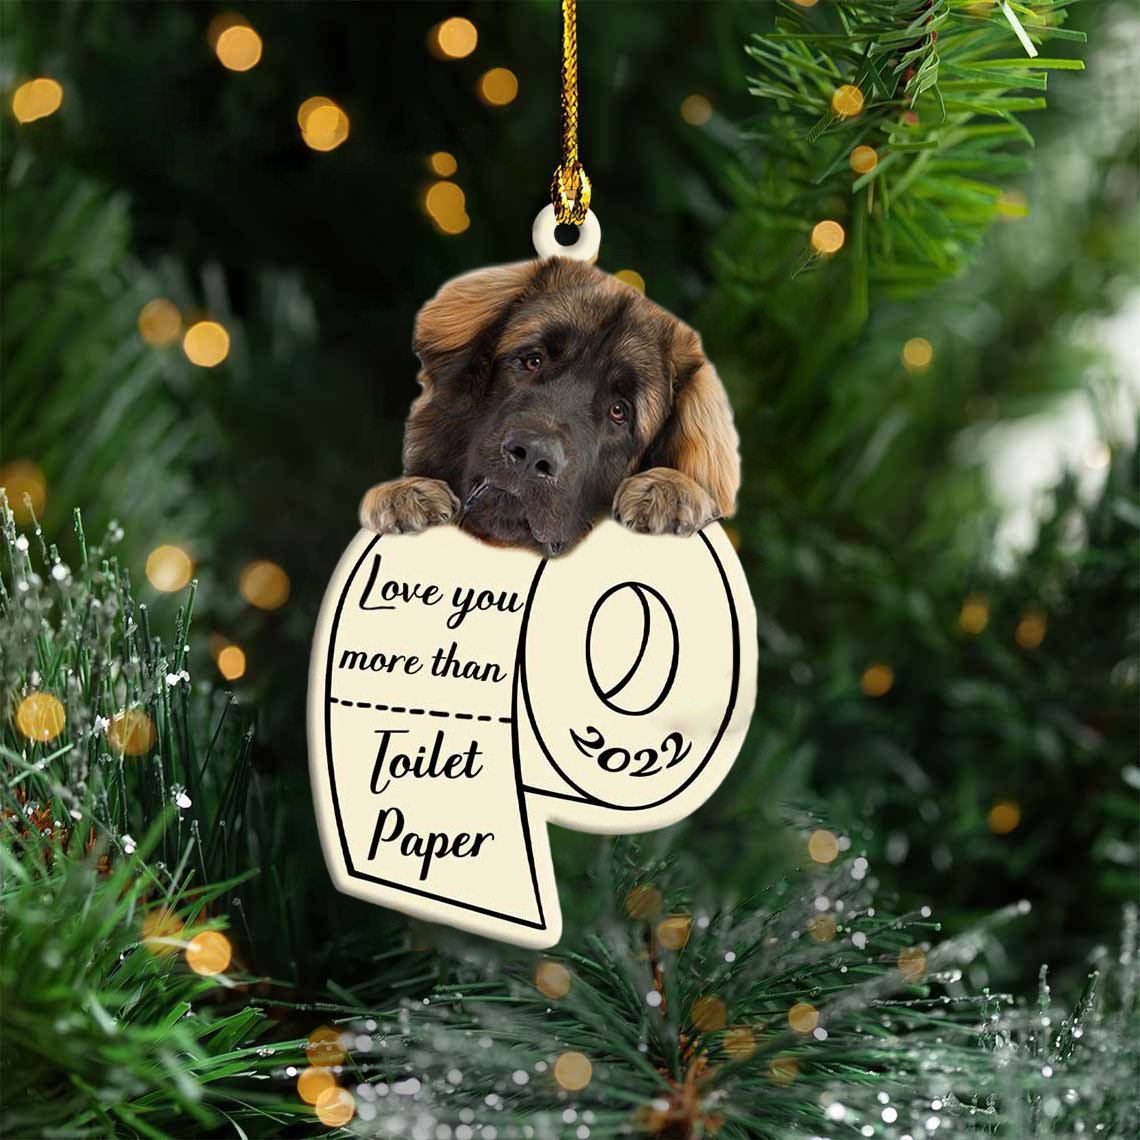 Leonberger Love You More Than Toilet Paper 2022 Hanging Ornament